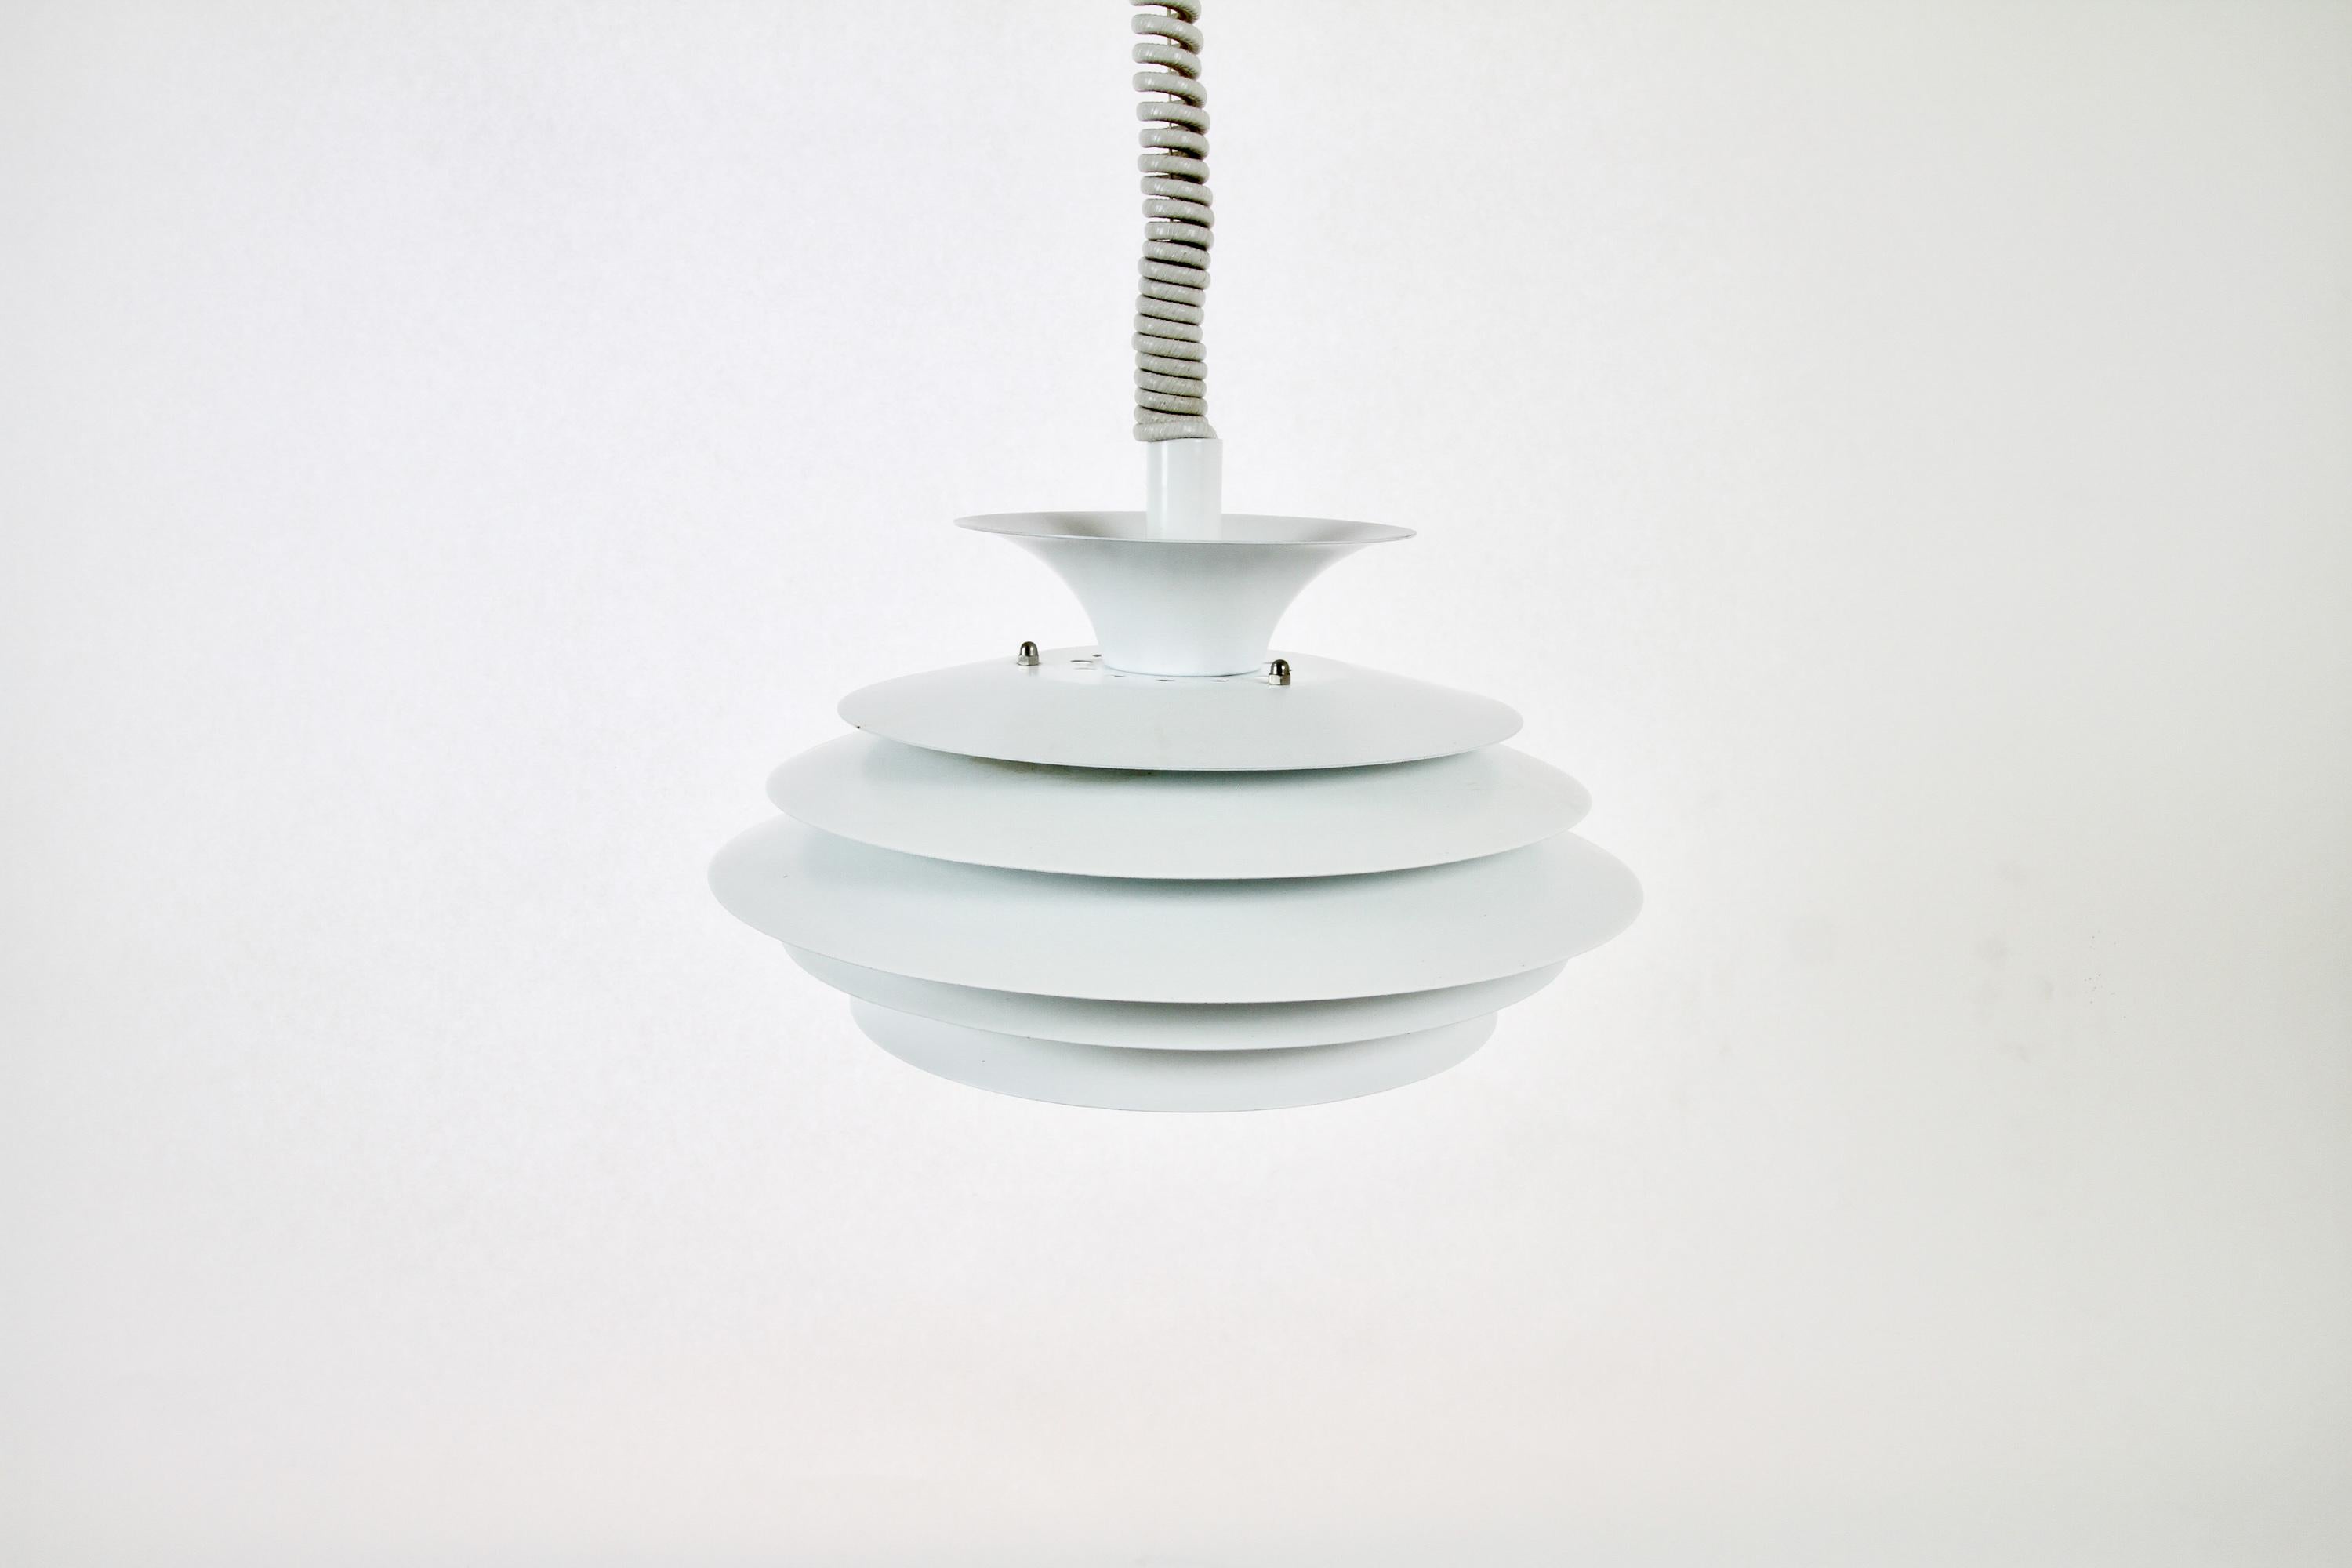 Danish vintage ceiling pendant by Top Lamper 1970s
Classic white ceiling lamp by Danish lamp company Top Lamper. Seven white metal shades disperses light in all directions without blinding. Lamp wire has a built in height adjustable function, so